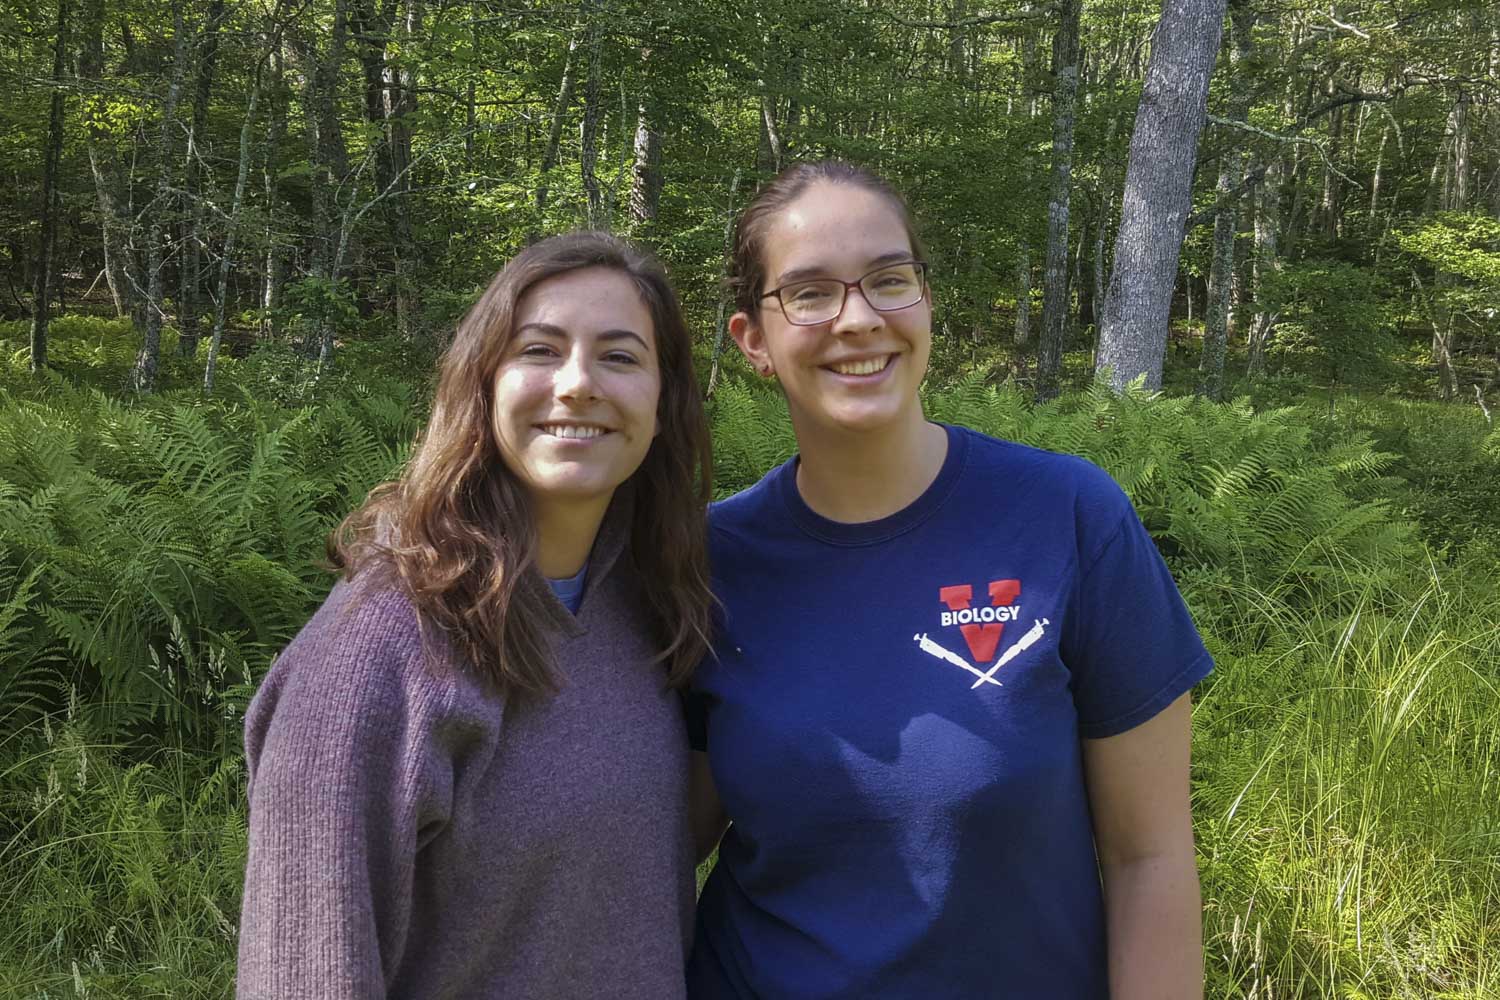 Rachel Thoms, left, and Rita Hueston stand together for a picture in the middle of the woods